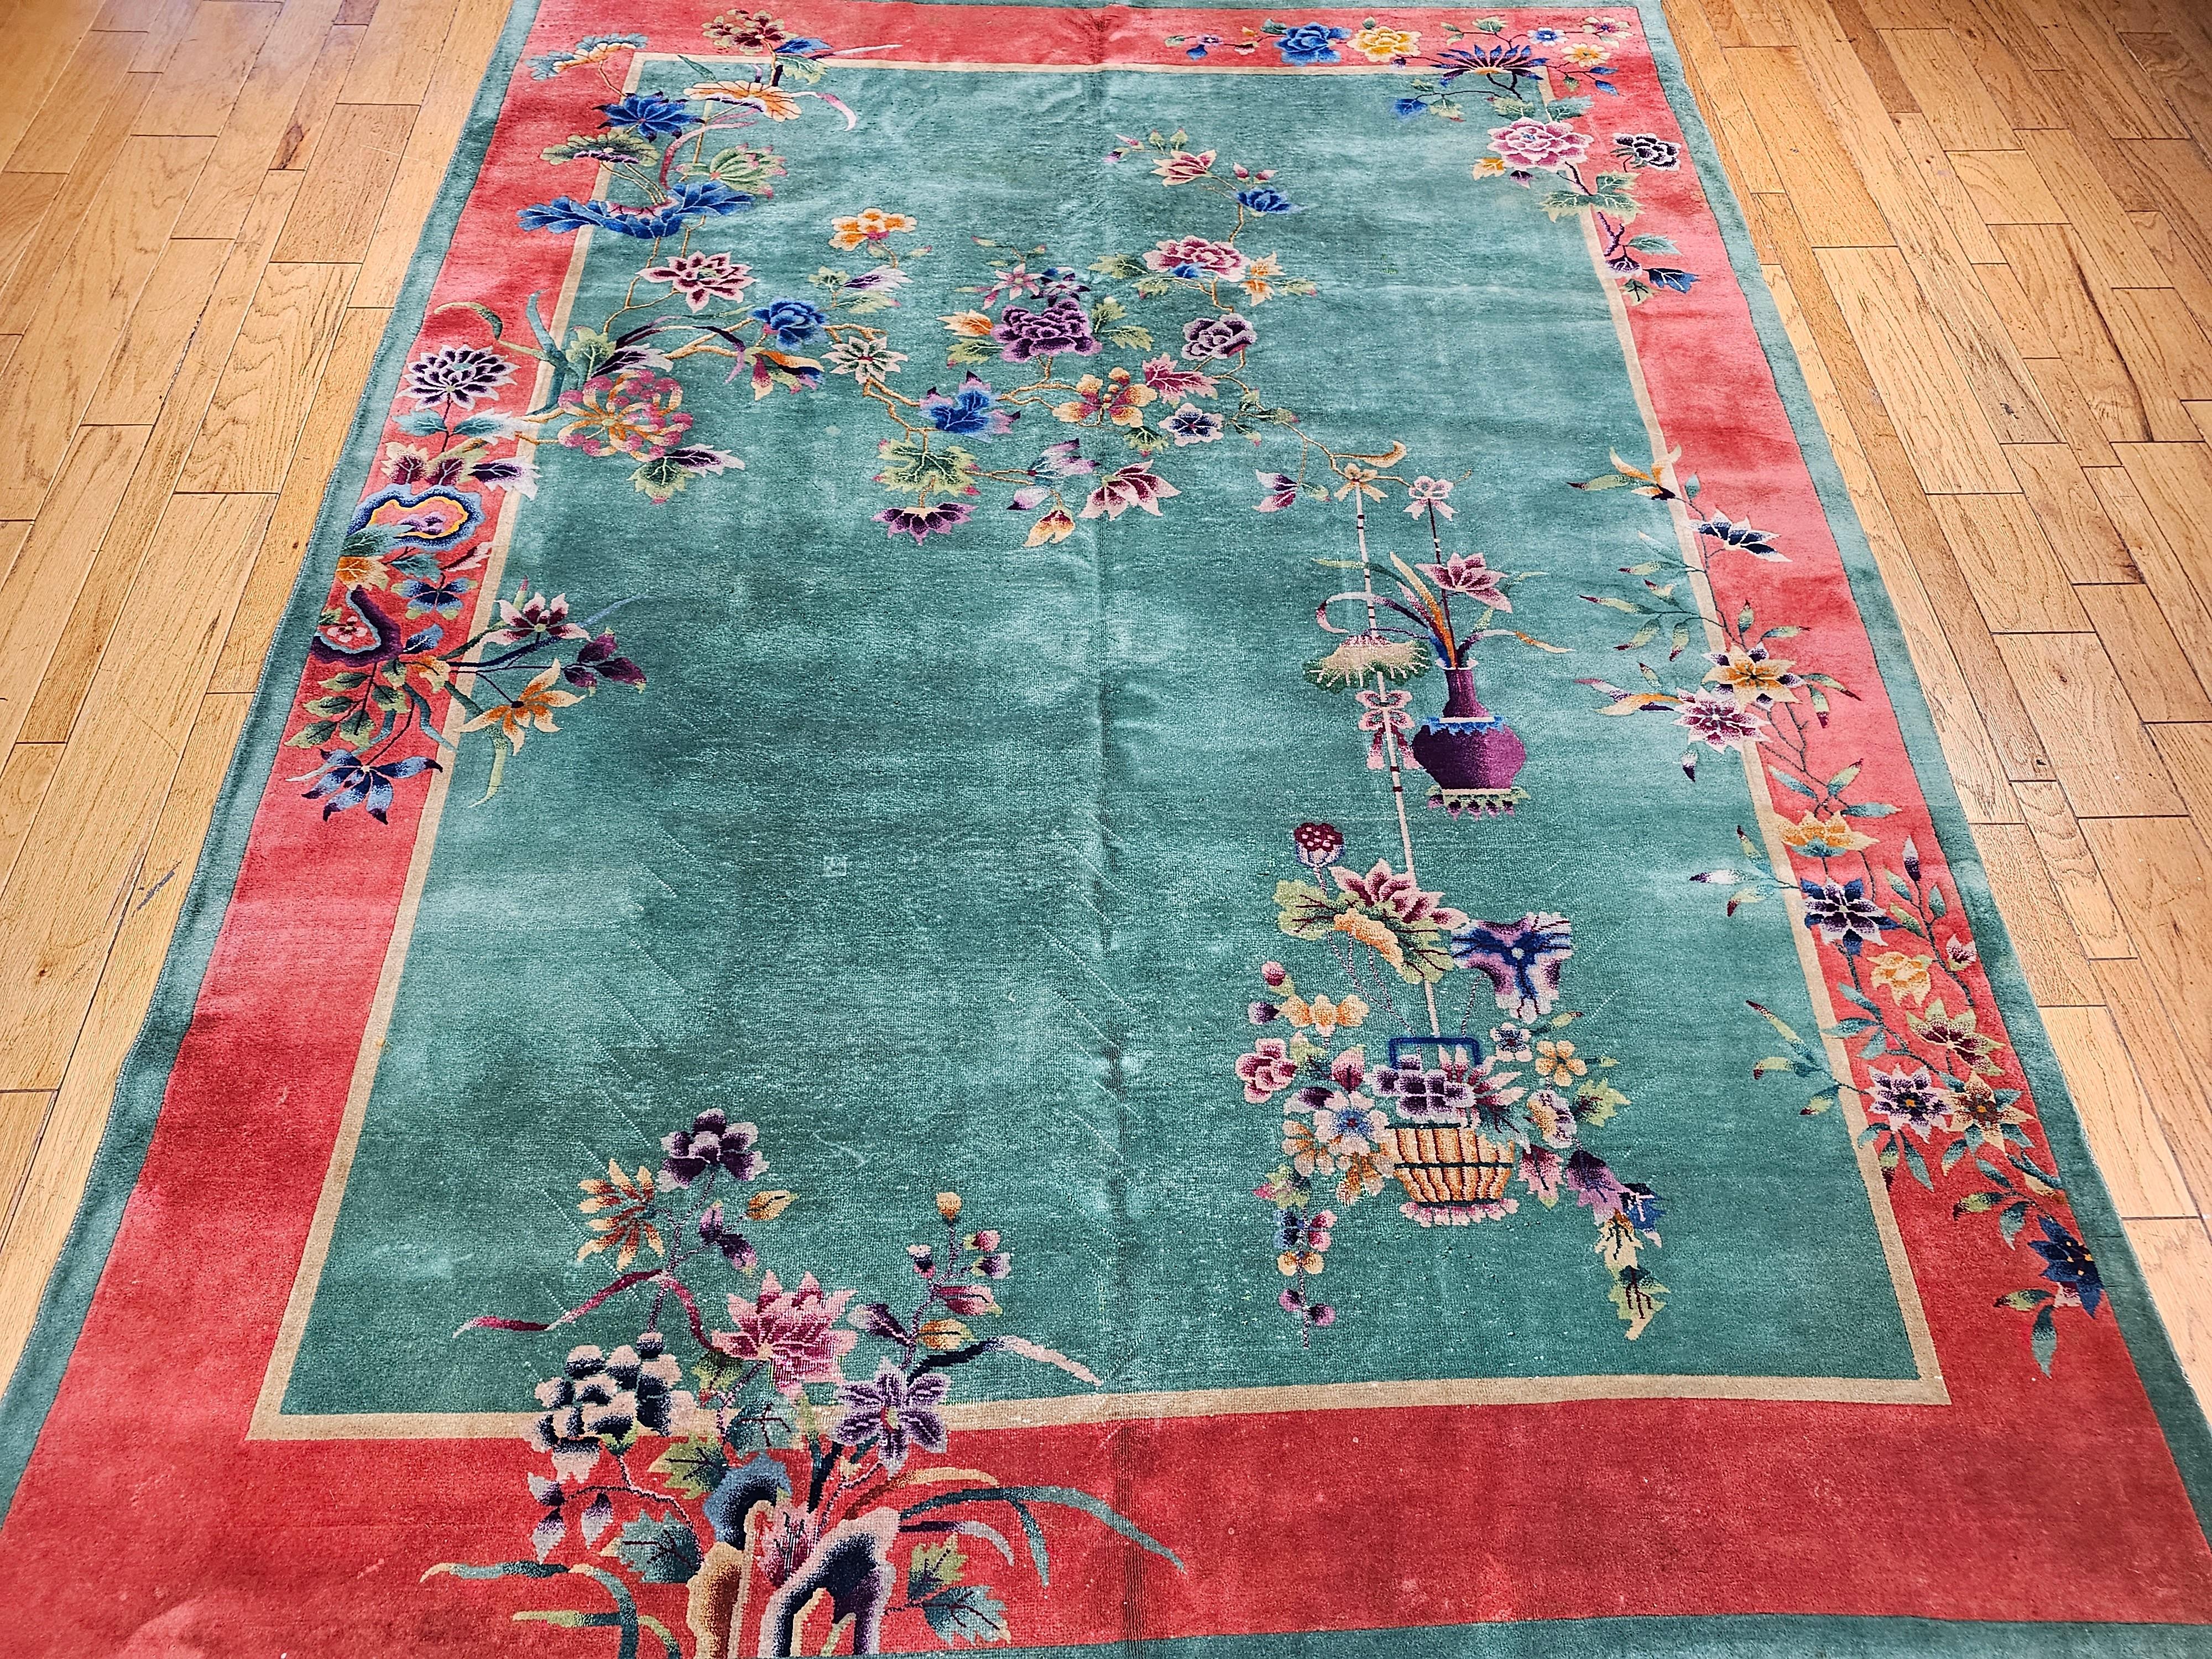 Breathtakingly Beautiful!  A hand-knotted Chinese Deco rug with a vase and floral design.  This rug has a beautiful green field with lush floral design perfusing throughout the field in purple, blue, red, yellow, and shades of those colors.    The